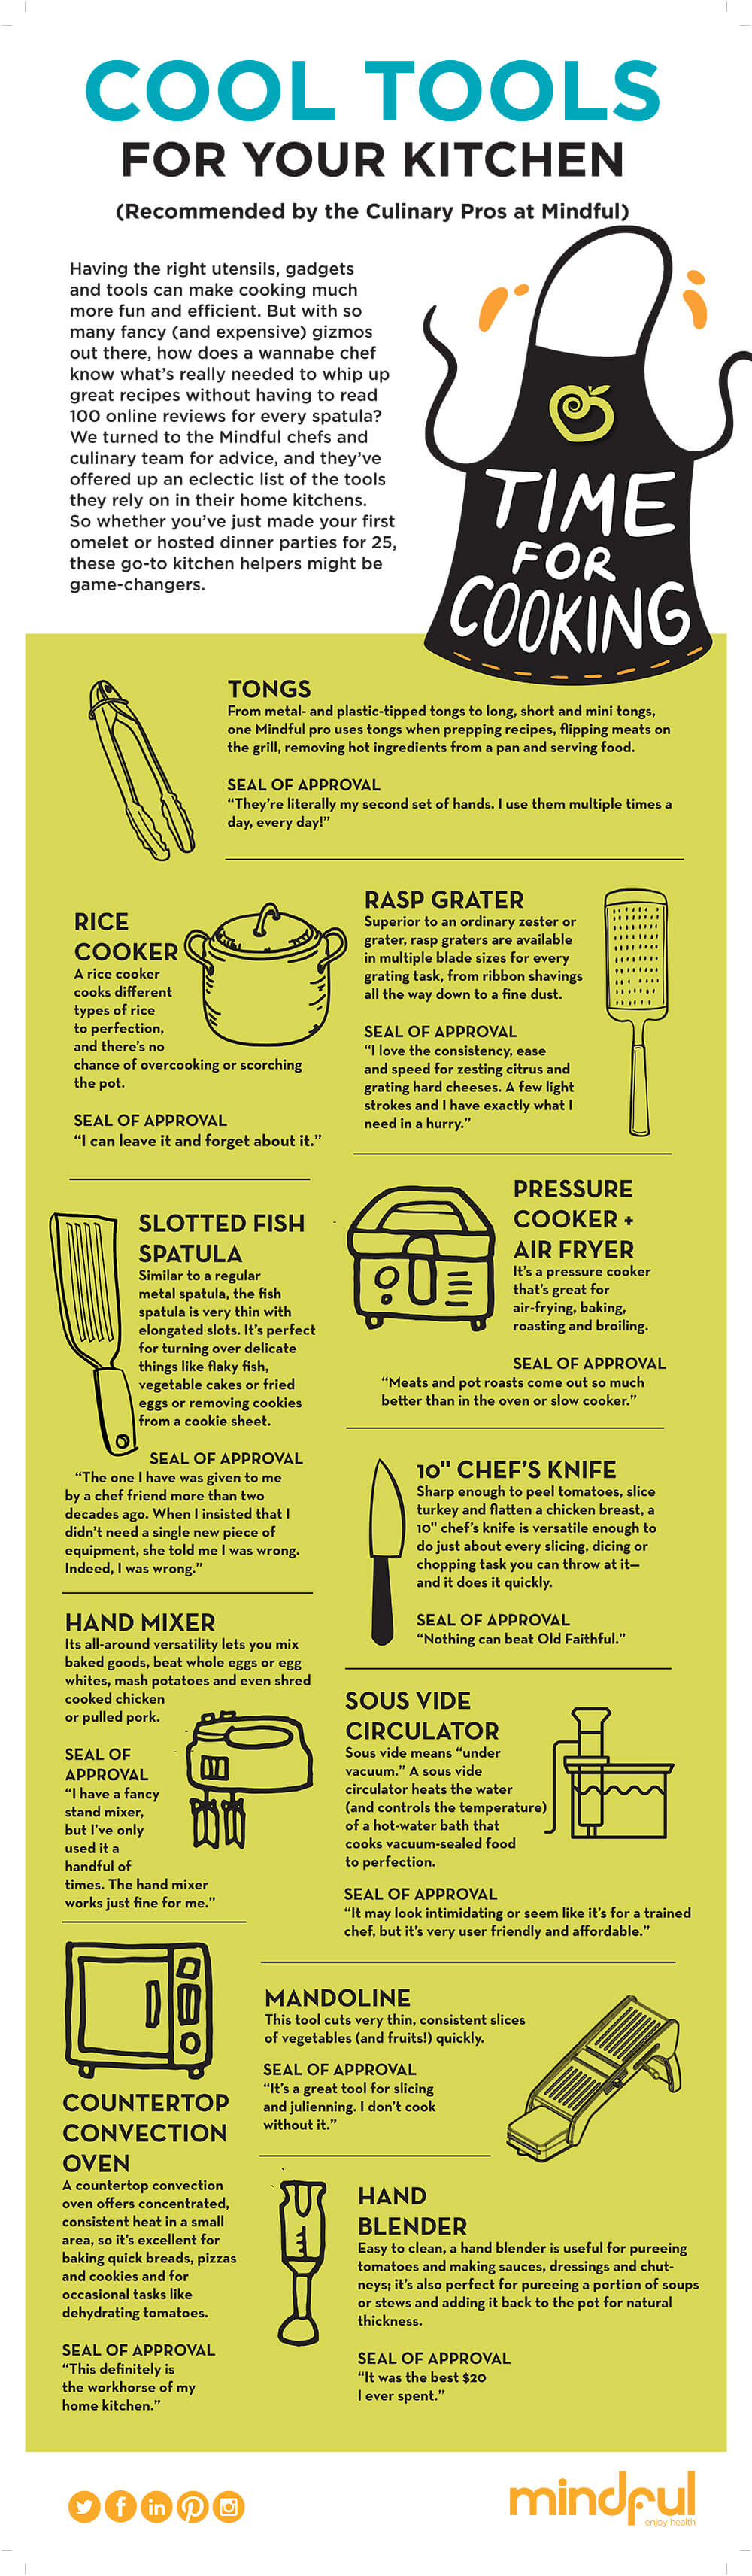 https://www.mindful.sodexo.com/wp-content/uploads/2021/04/MDF_May_Infographic-CoolToolsforKitchen.jpg